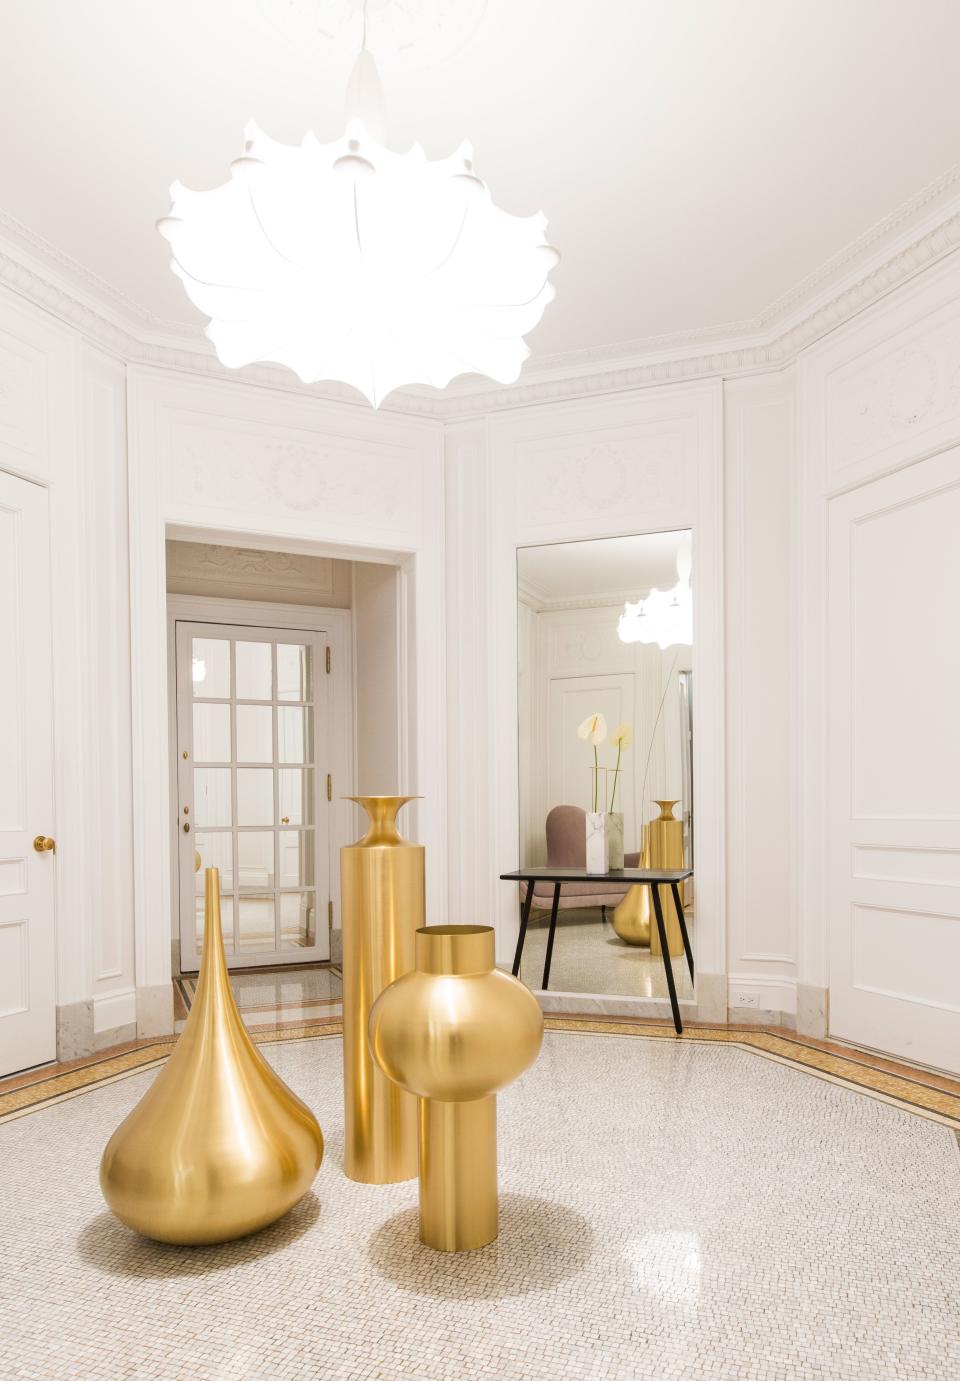 This 5,000-square-foot five-bedroom apartment in the Apthorp, a landmarked New York City condominium built in 1908, was designed by Megan Grehl of Homepolish. The foyer shows off a trio of Tom Dixon's “Beat” floor vessels, whose curvaceous shapes pair well with Marcel Wander’s “Mad” chaise lounge (seen in the mirror) and “Zeppelin” light pendant.